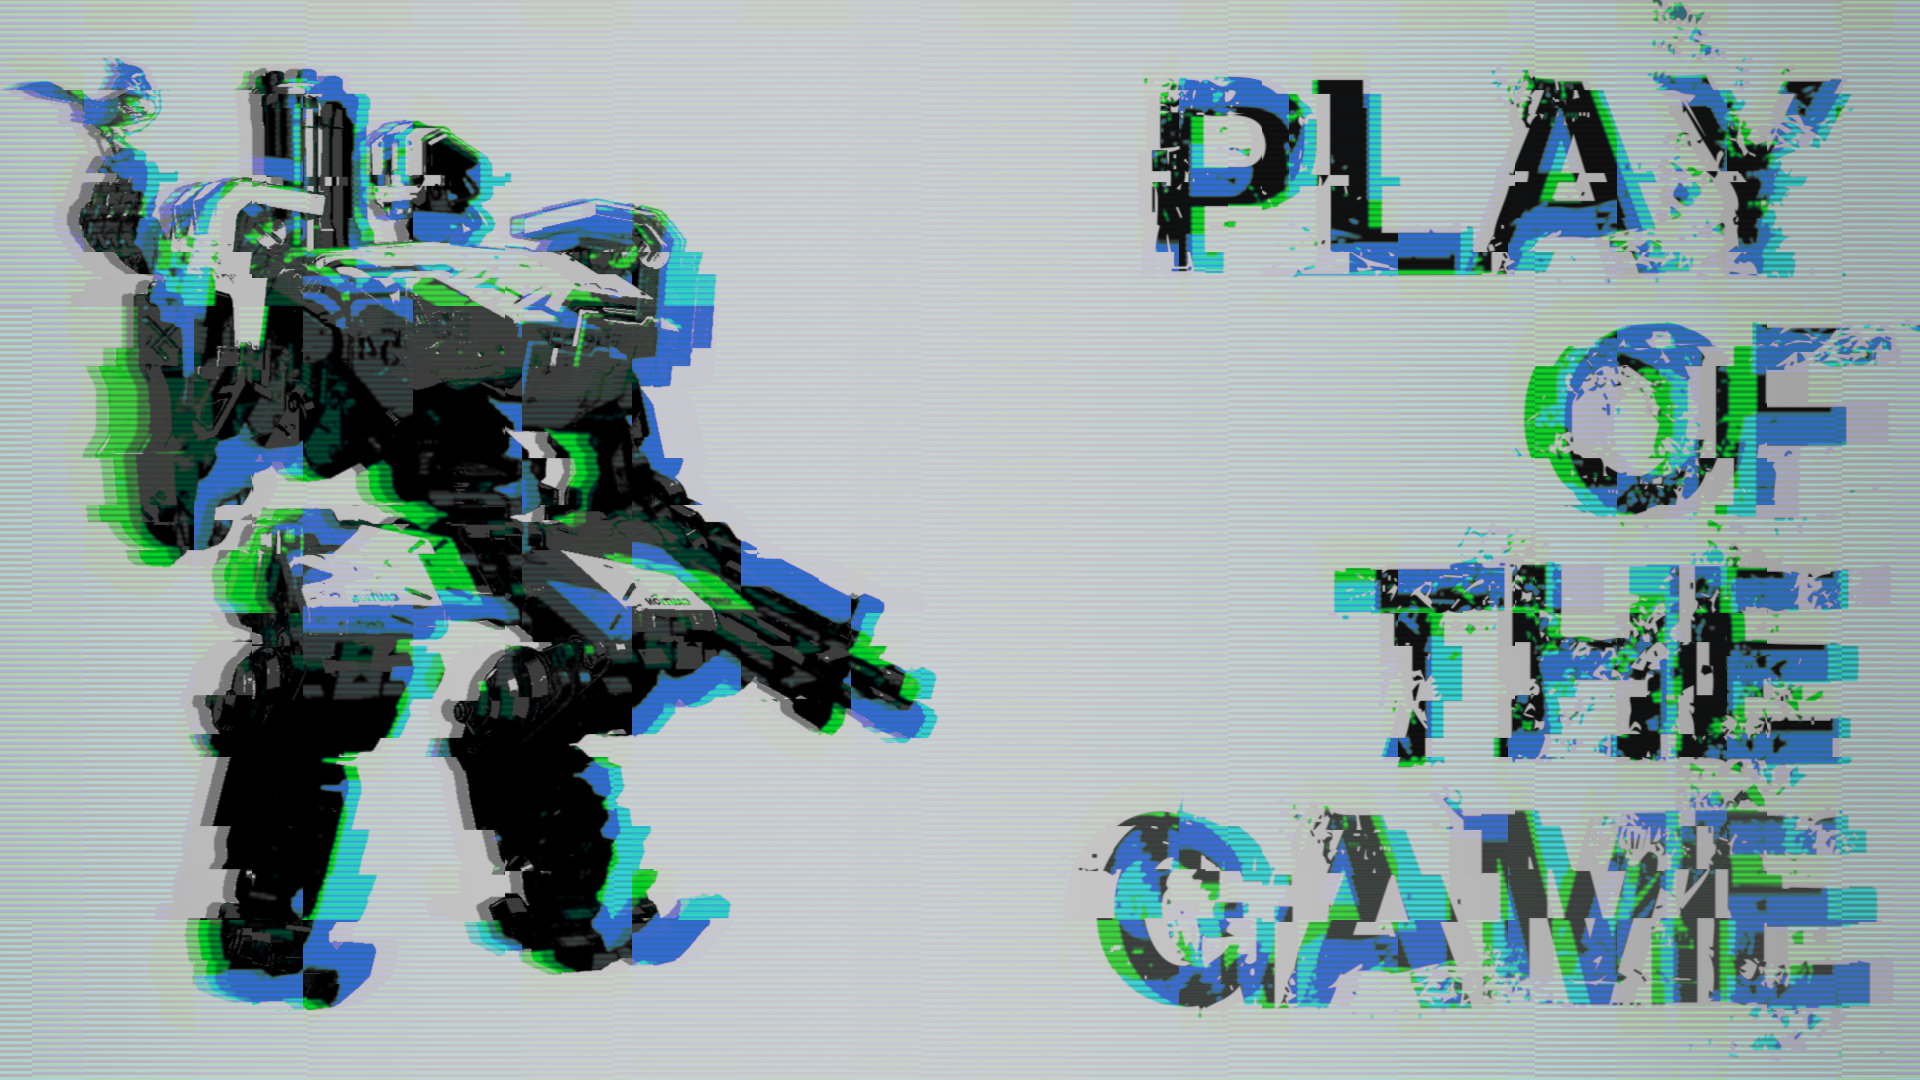 General 1920x1080 video games Overwatch Bastion (Overwatch) glitch art PC gaming video game art typography